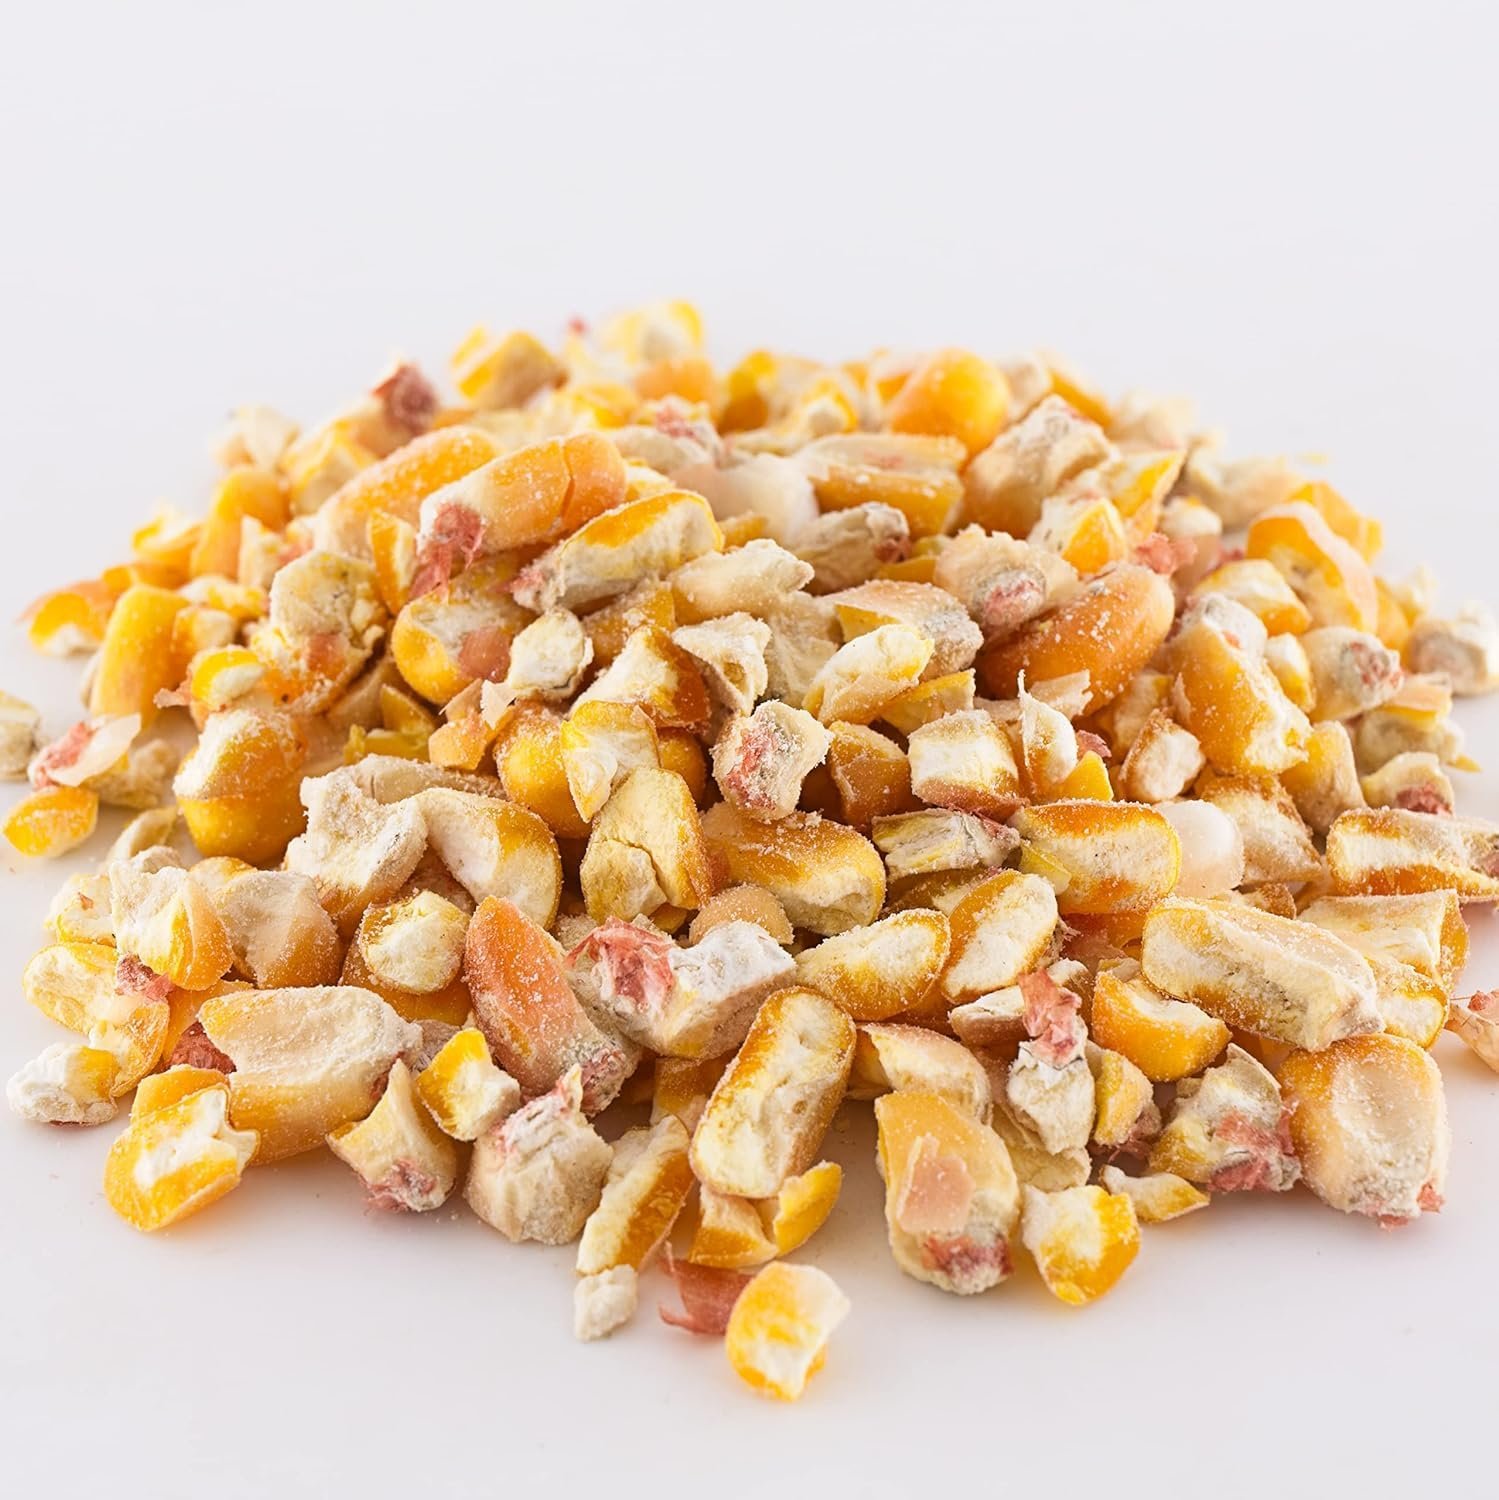 Sky Ecommerce Crazy Nuts | Non GMO Cracked Corn Feed, 10lb | Vacuum Sealed, Cracked Corn for Wild Birds Seeds, Cracked for for Chickens, Cracked Corn Duck Food